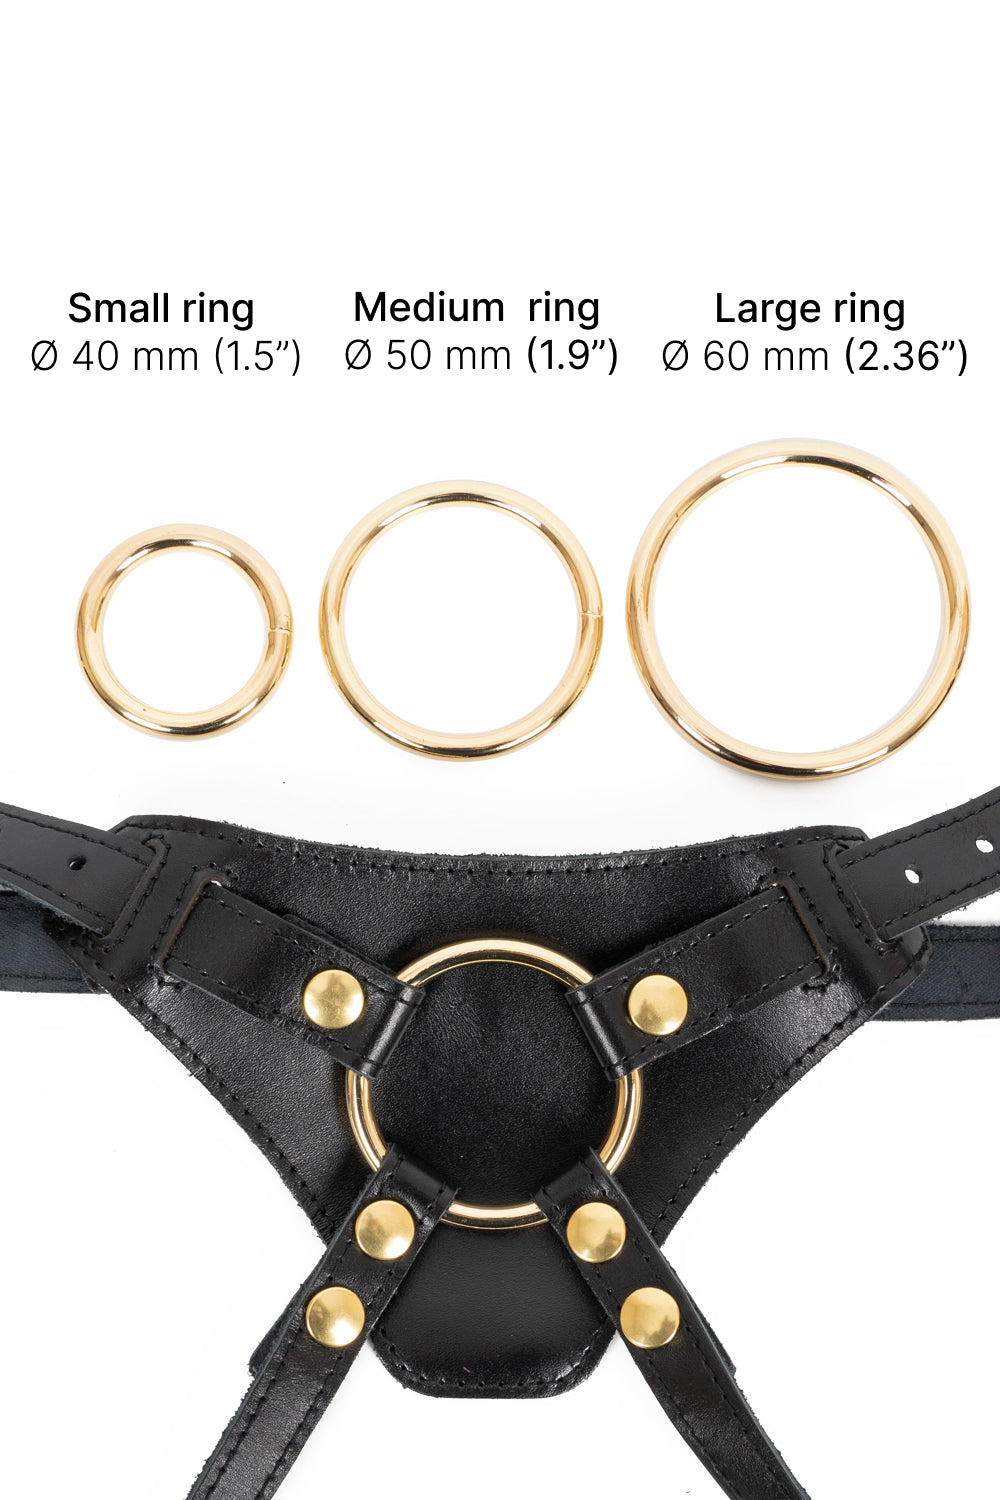 Leather panties crotchless with 3 strap-on O-rings. Black